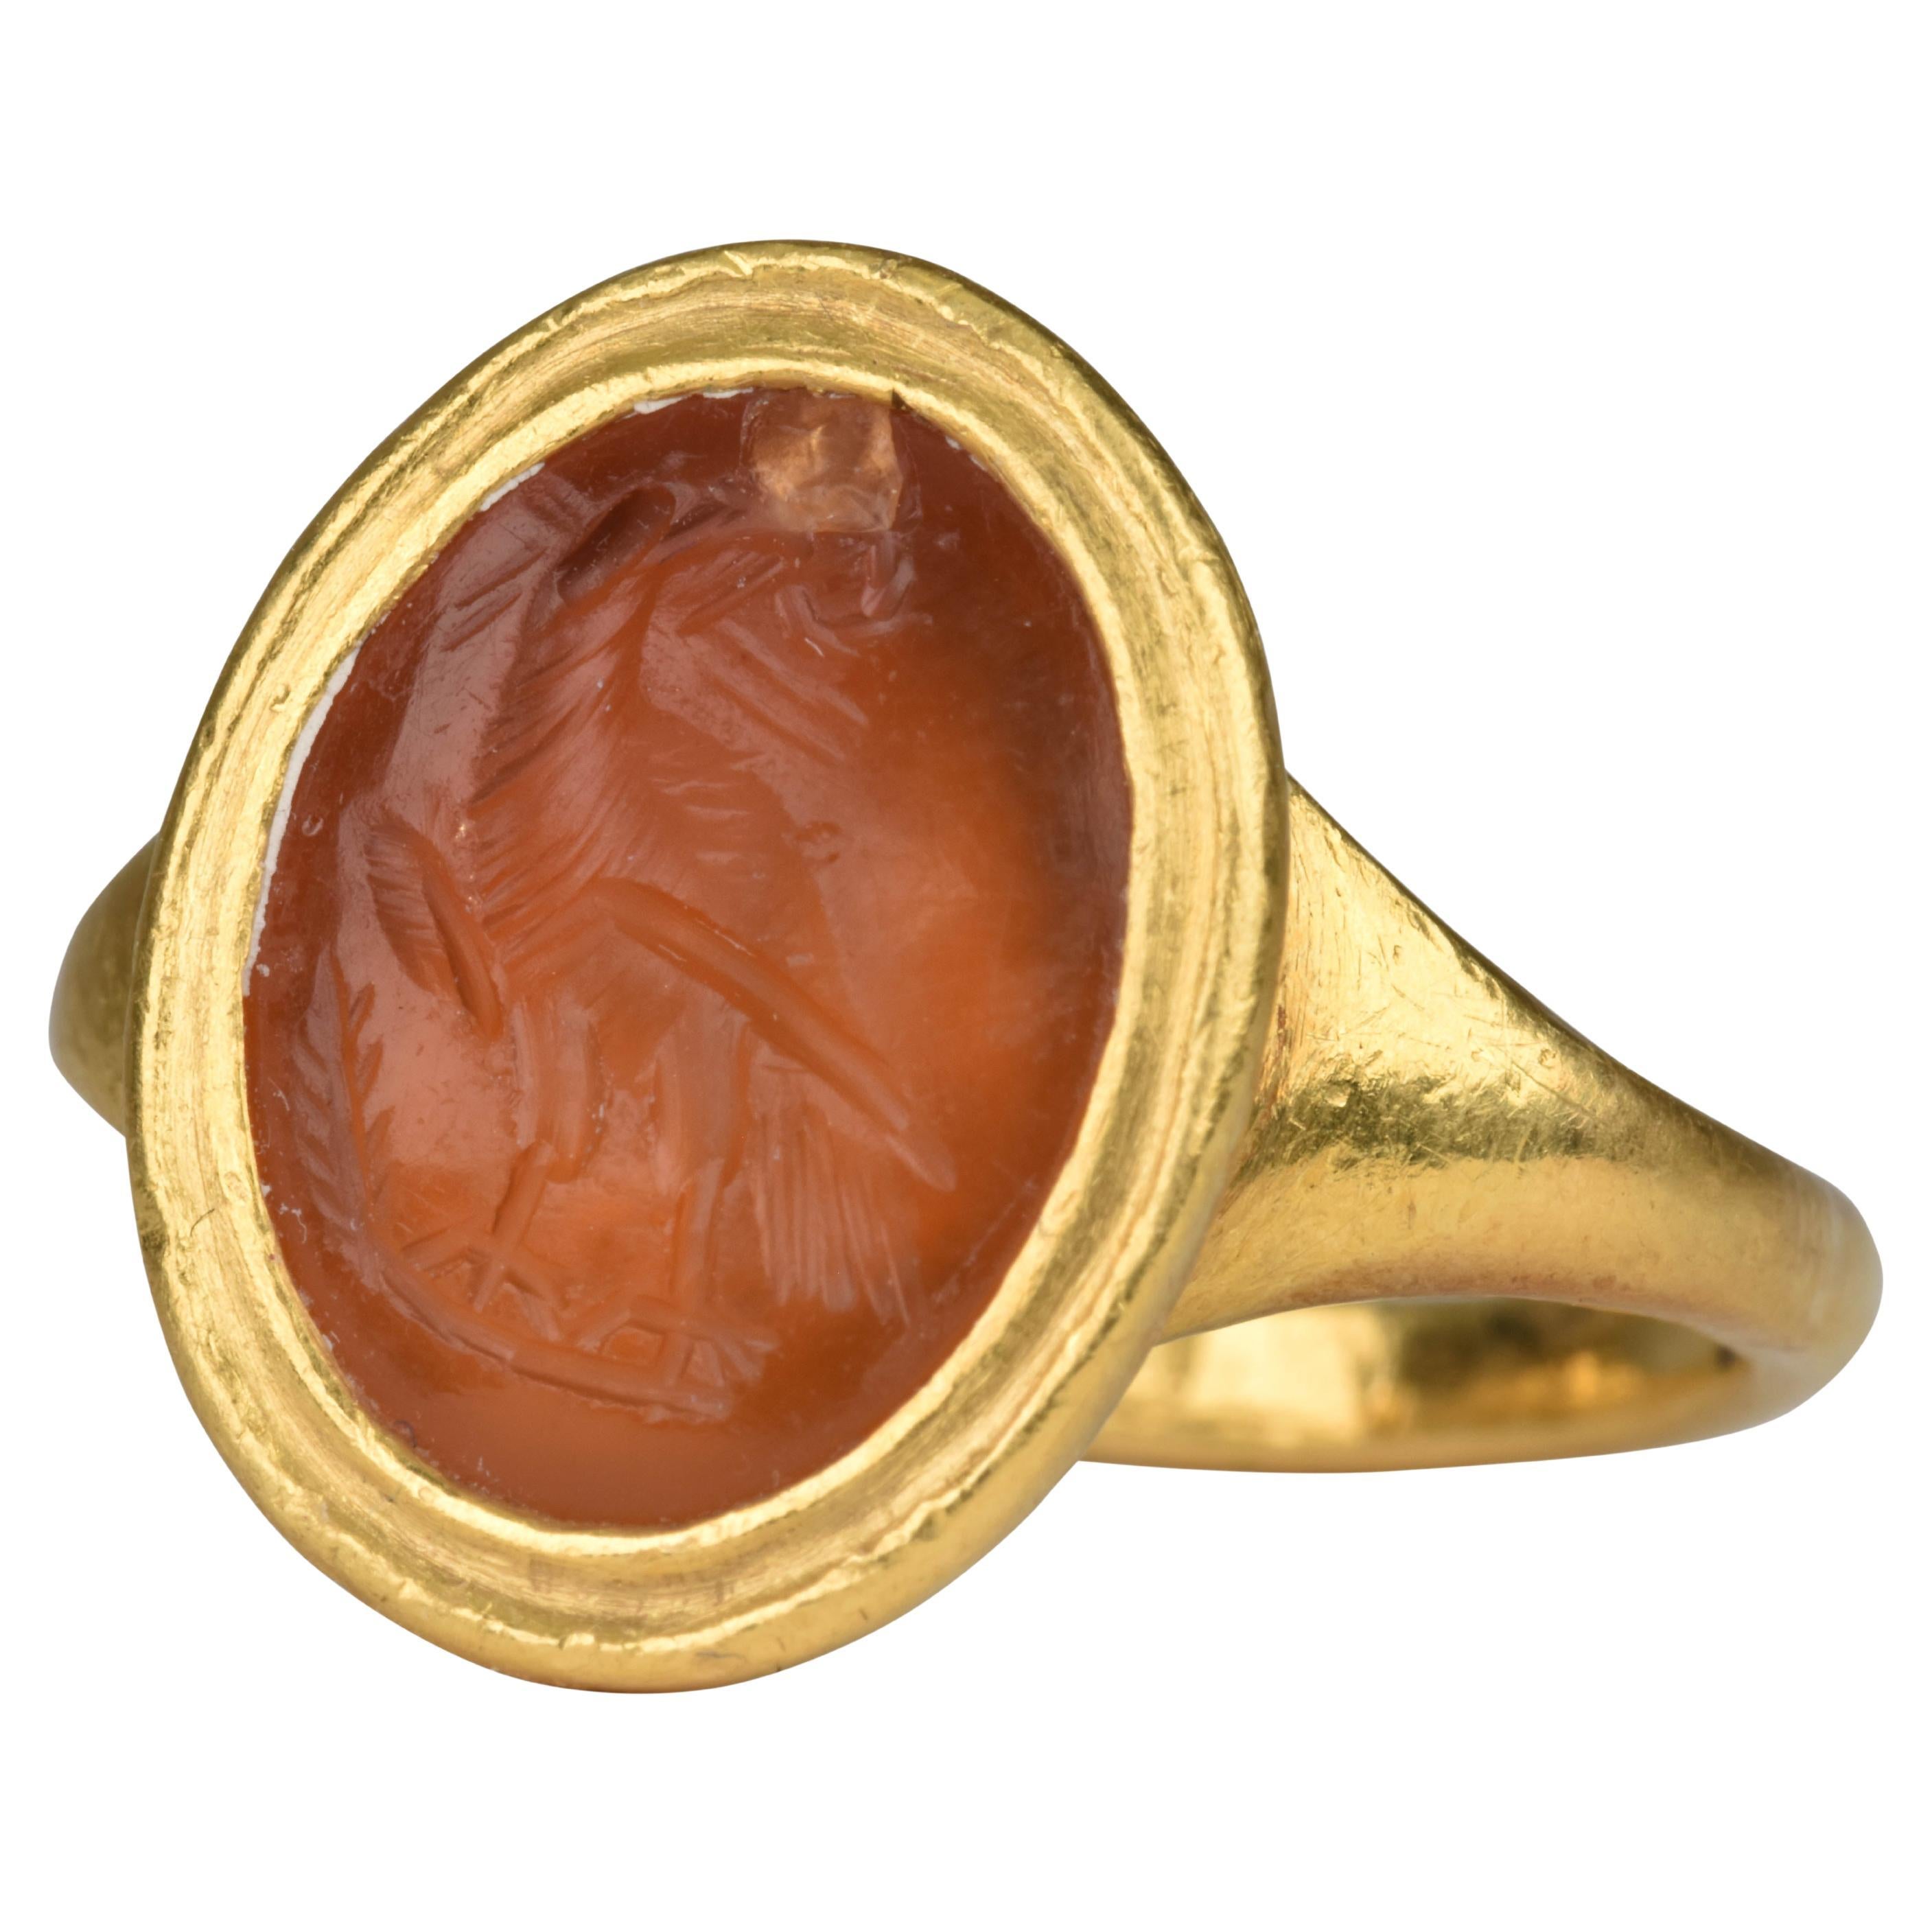 Ancient Roman Gold Legionary Signet Ring with an Eagle Carnelian Intaglio